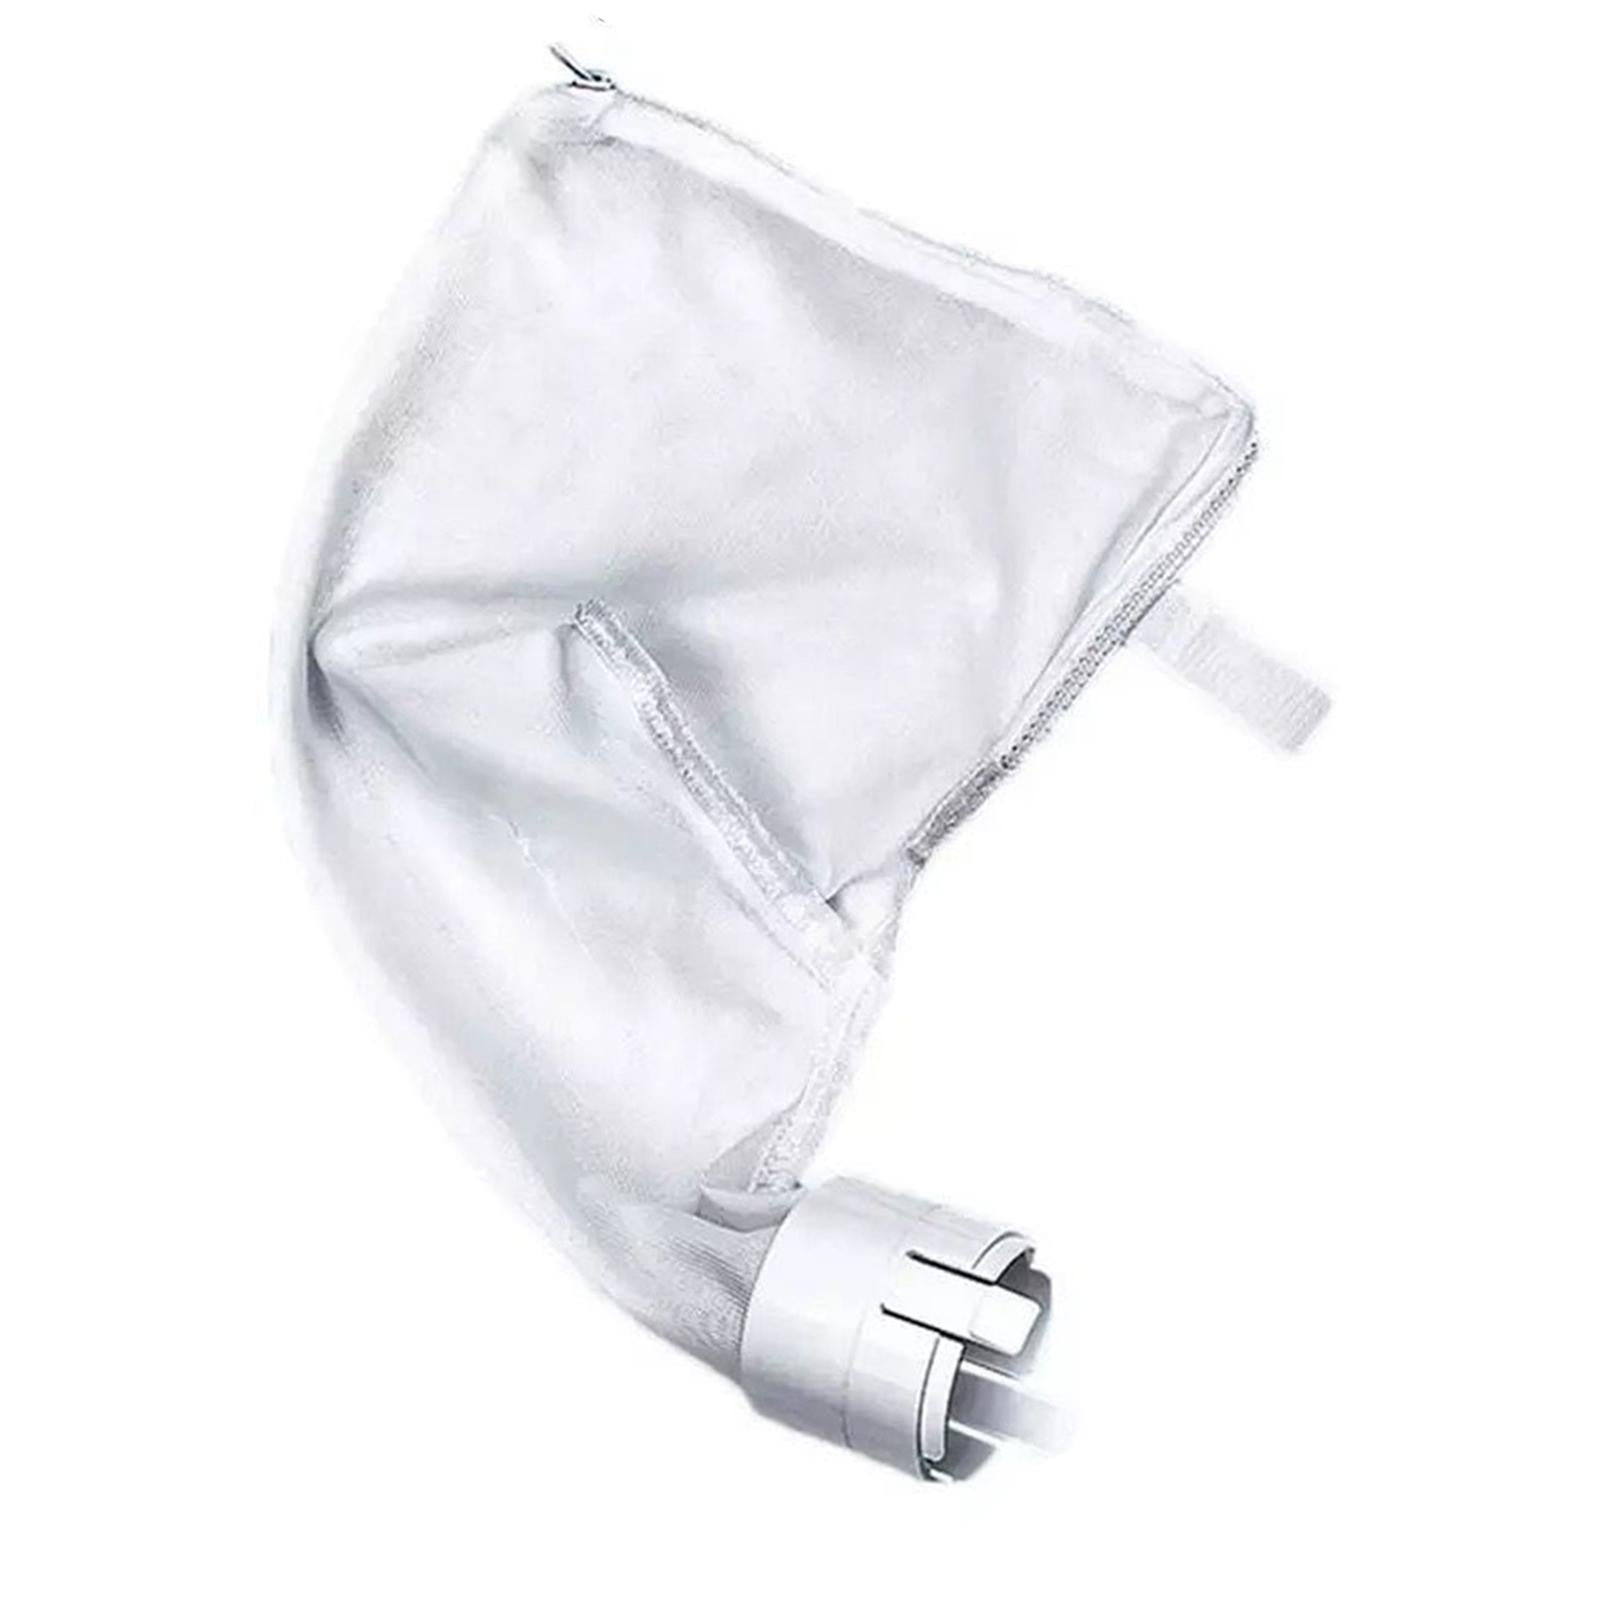 Zippered Filter Bag Pool Cleaner Zipper Filter Bag for 360 Pool Cleaner Accessories